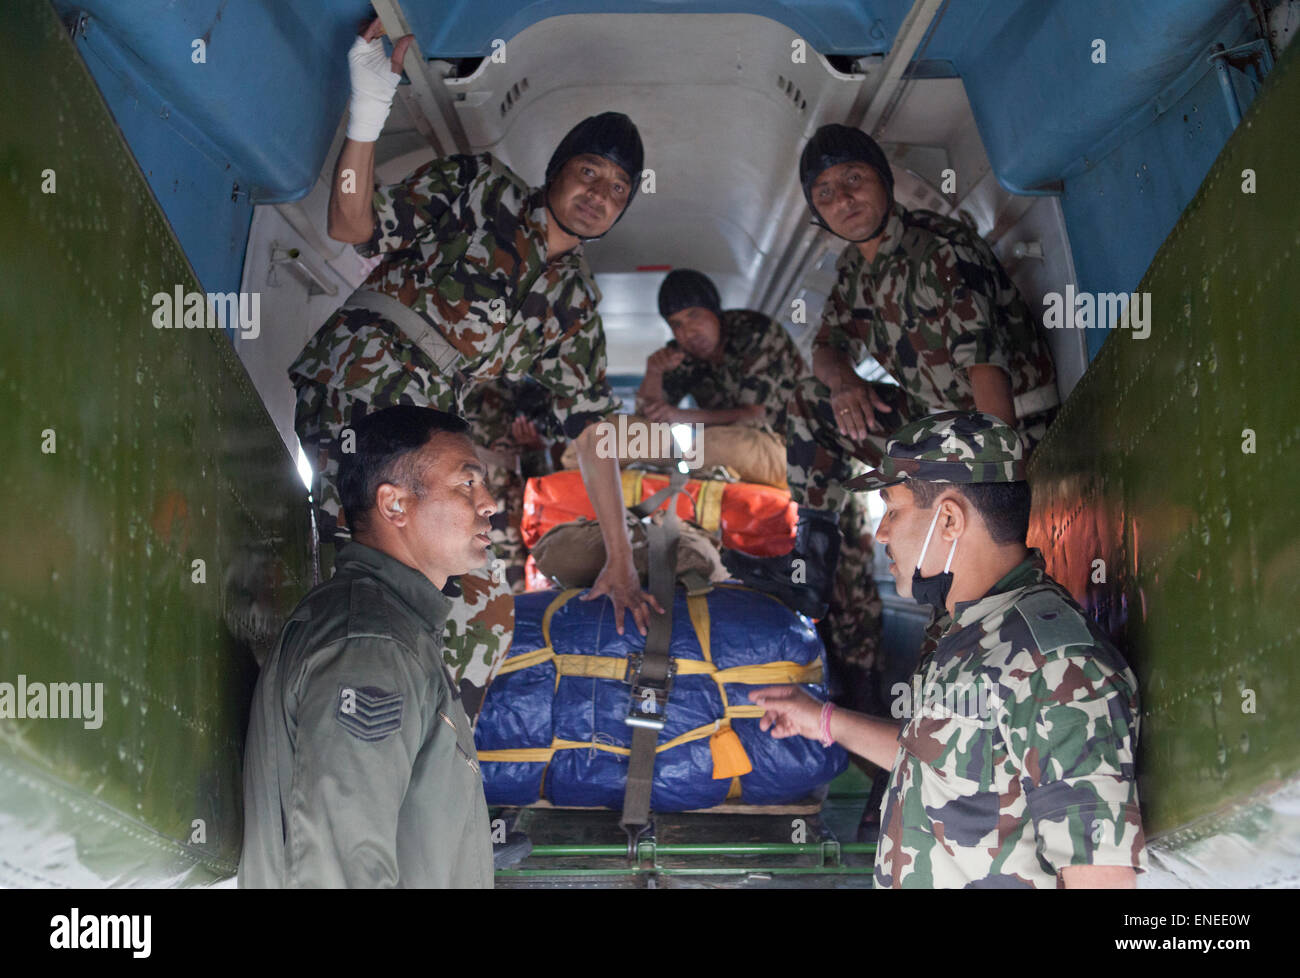 Nepal. 3rd May, 2015. Napoli Army prepare for an air drop at Tribhuvan International Airport in Kathmandu. A major 7.9 earthquake hit Kathmandu mid-day on Saturday, April 25th, and was followed by multiple aftershocks that triggered avalanches on Mt. Everest that buried mountain climbers in their base camps. Credit:  PixelPro/Alamy Live News Stock Photo